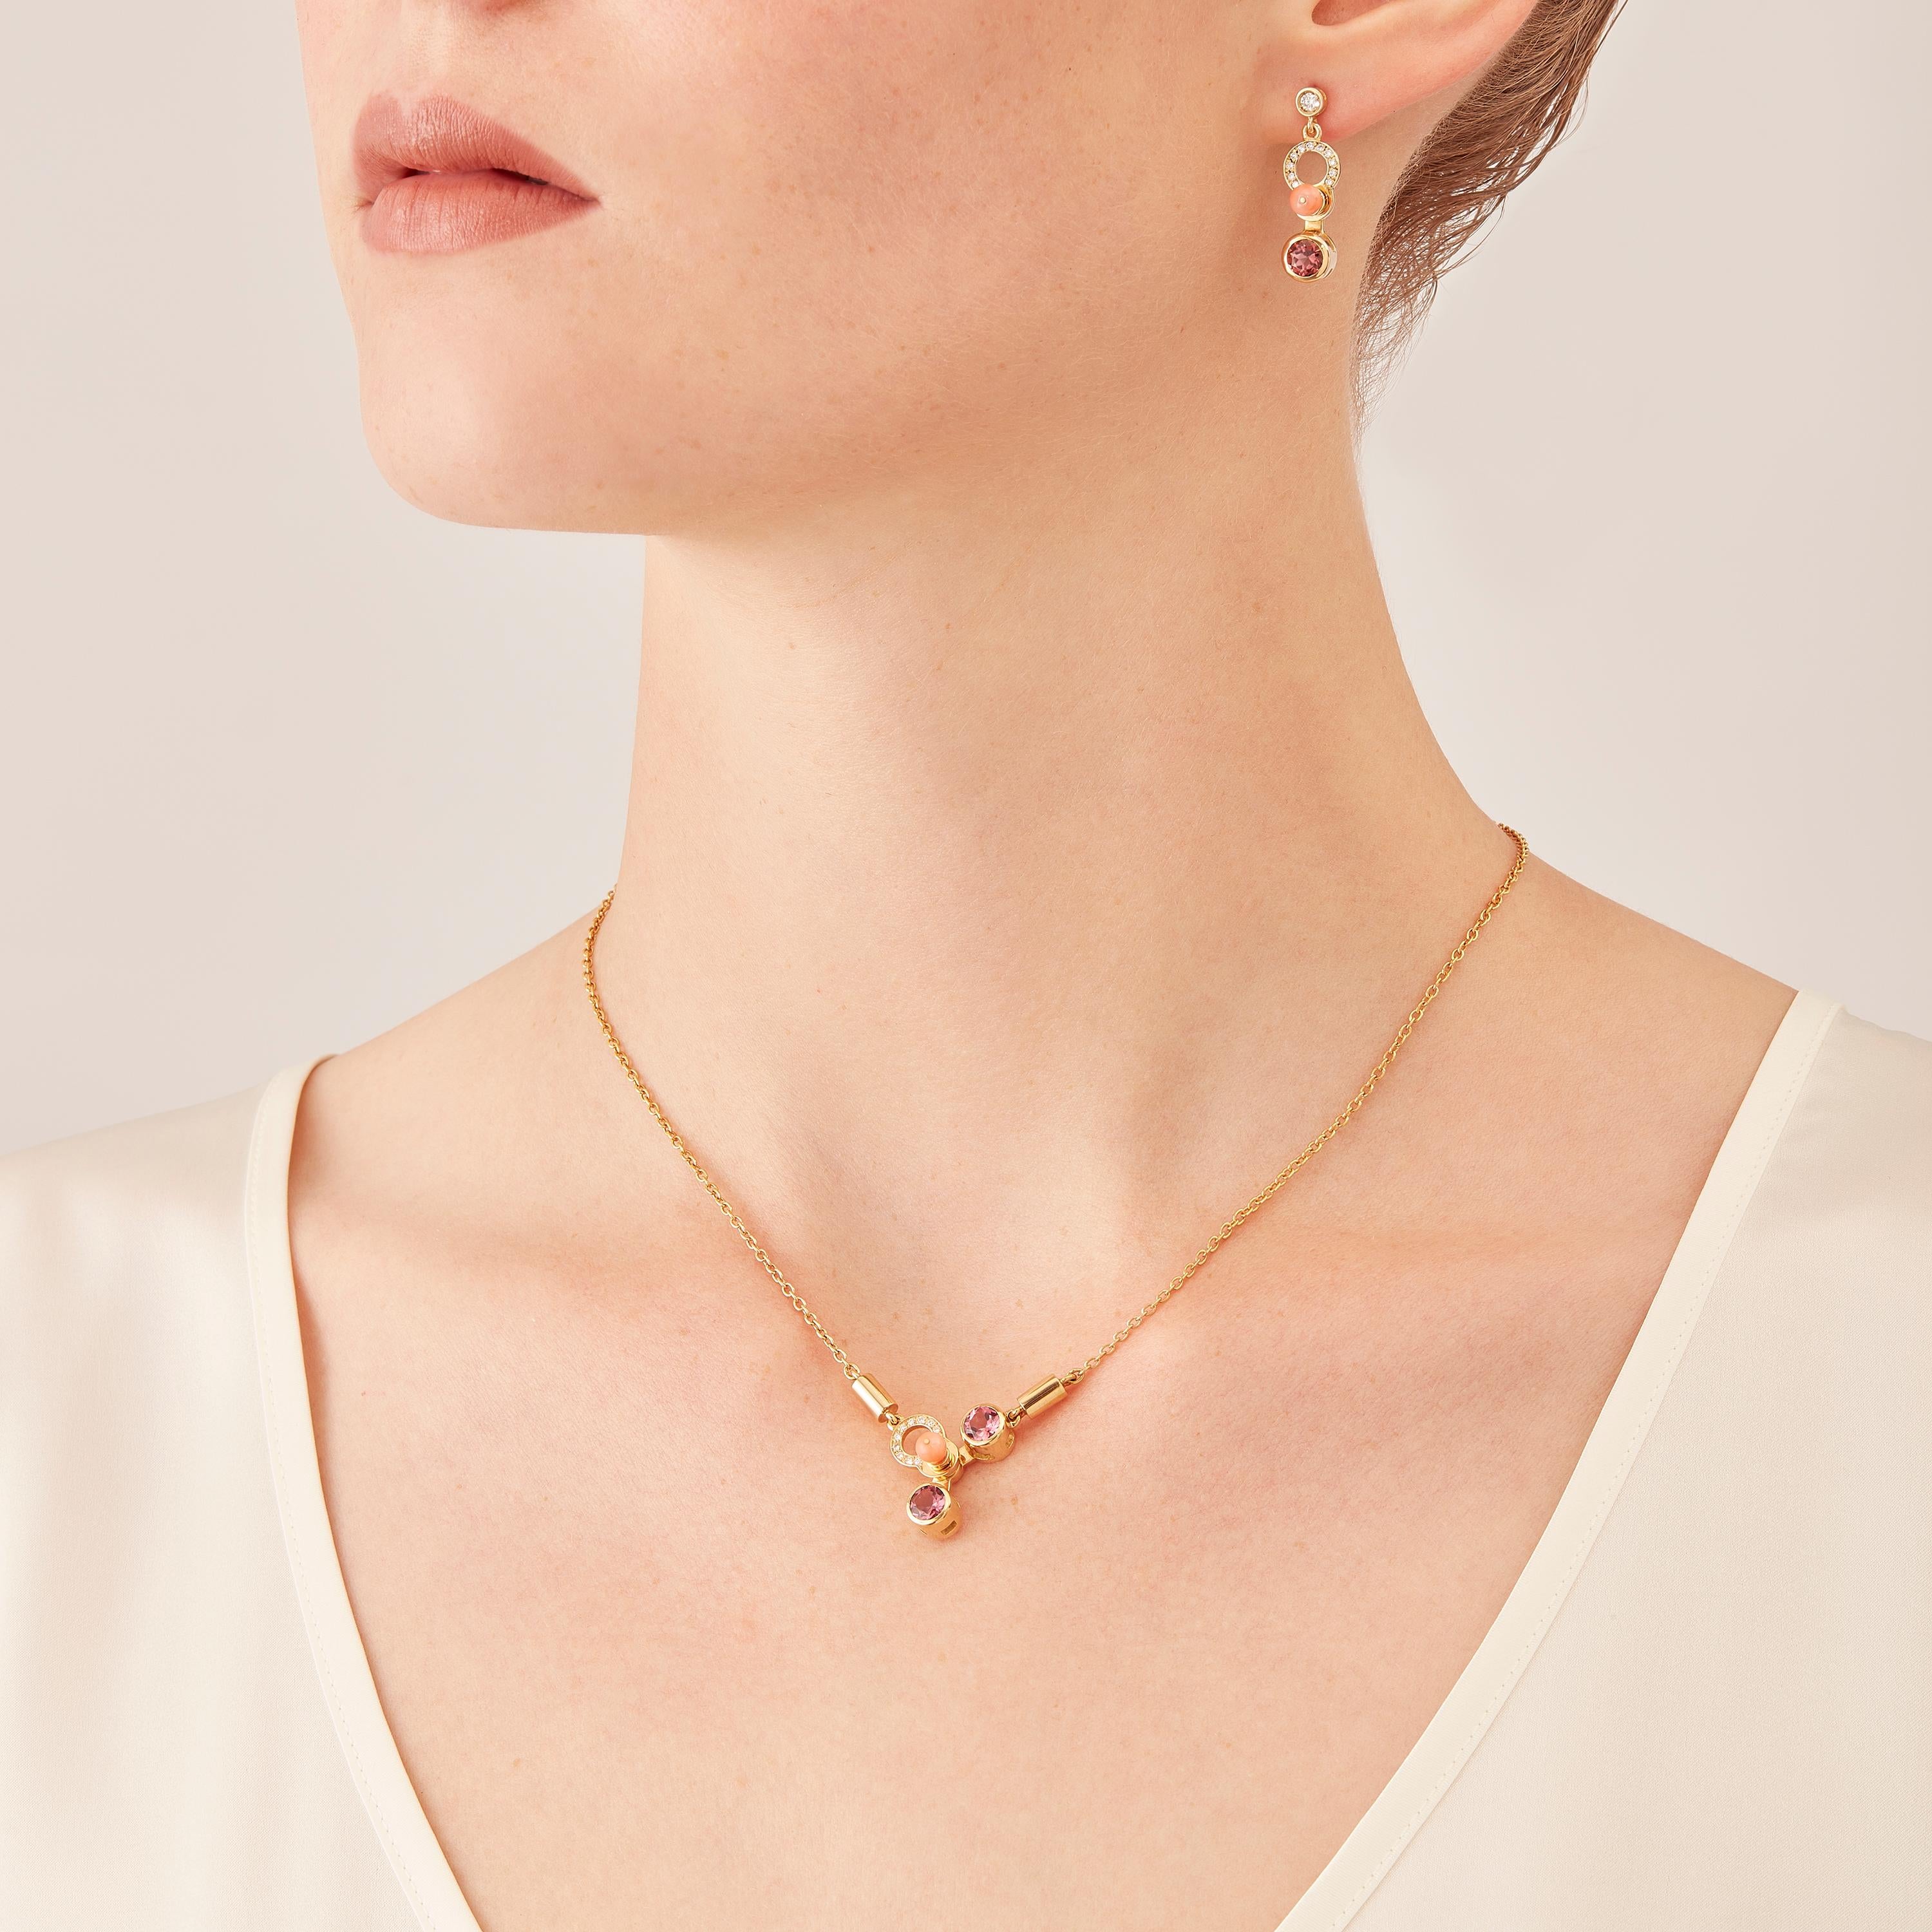 Made by hand in Nathalie Jean's Milan atelier, Microcosmos Pendant Necklace in 18 karat rosé gold, a warm, sophisticated color close to yellow gold, is devised as a game, a construction or a sophisticated aerial mobile. Shapes attached to gold